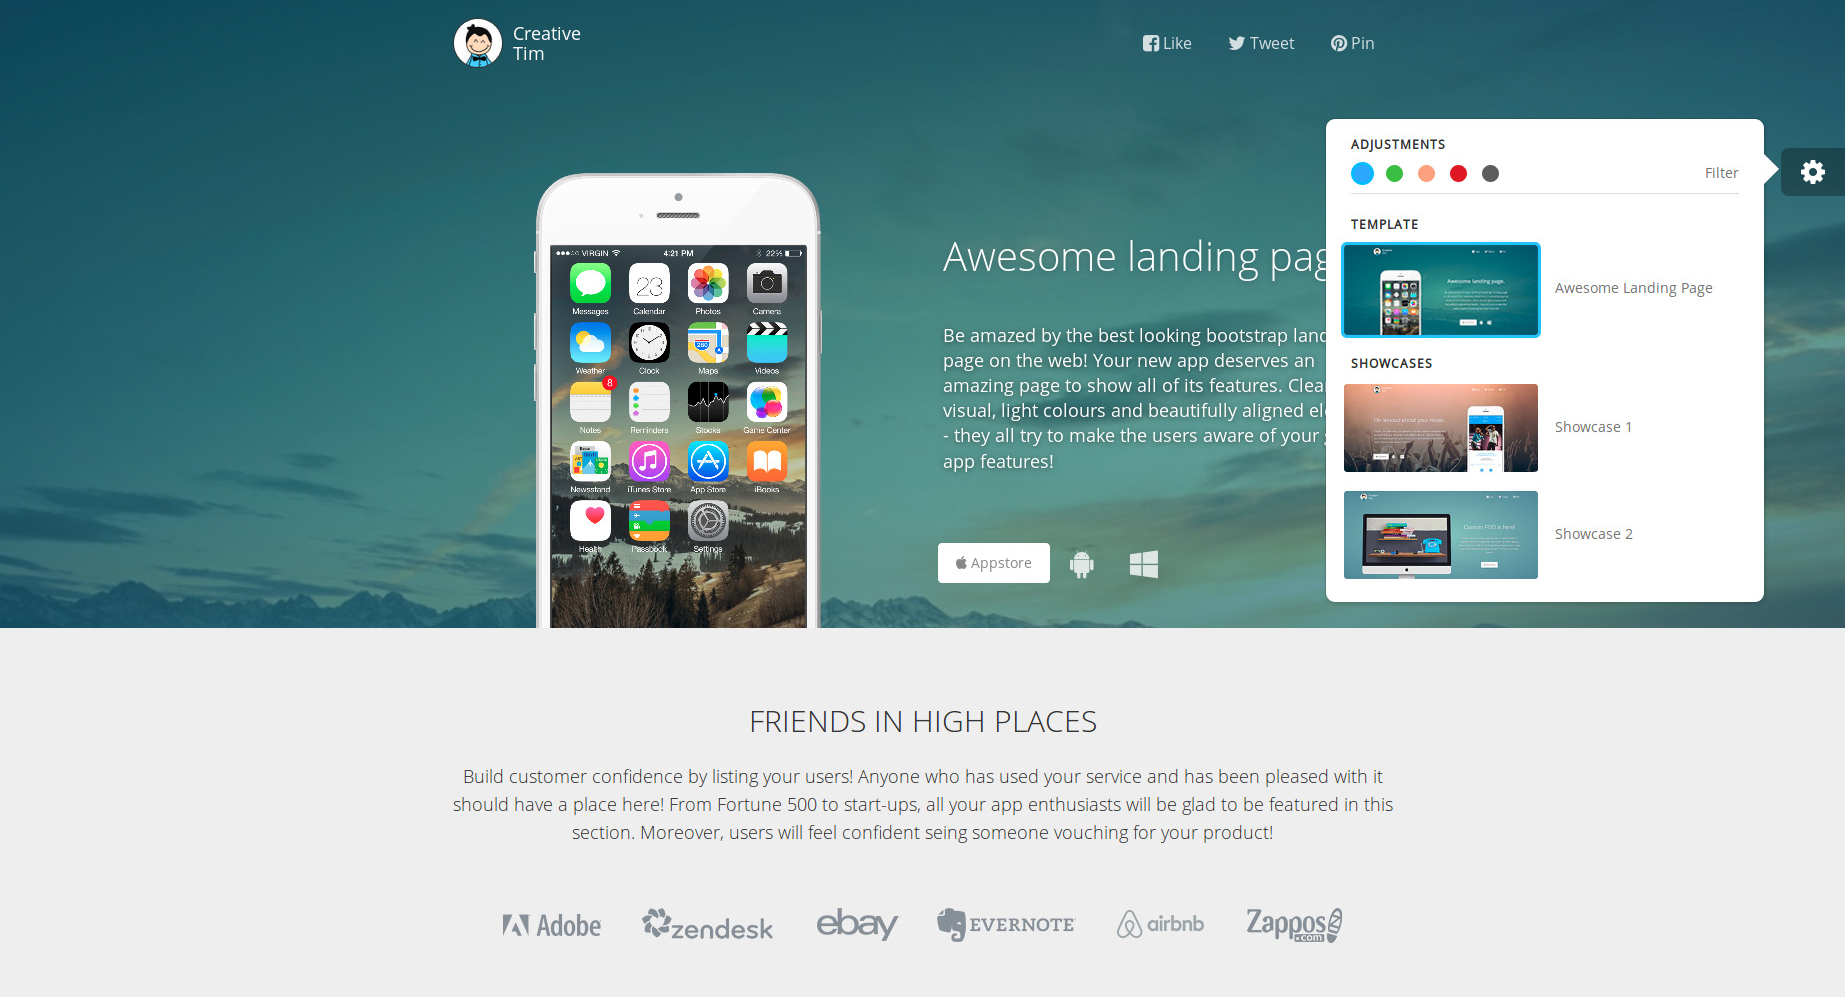 Awesome landing page